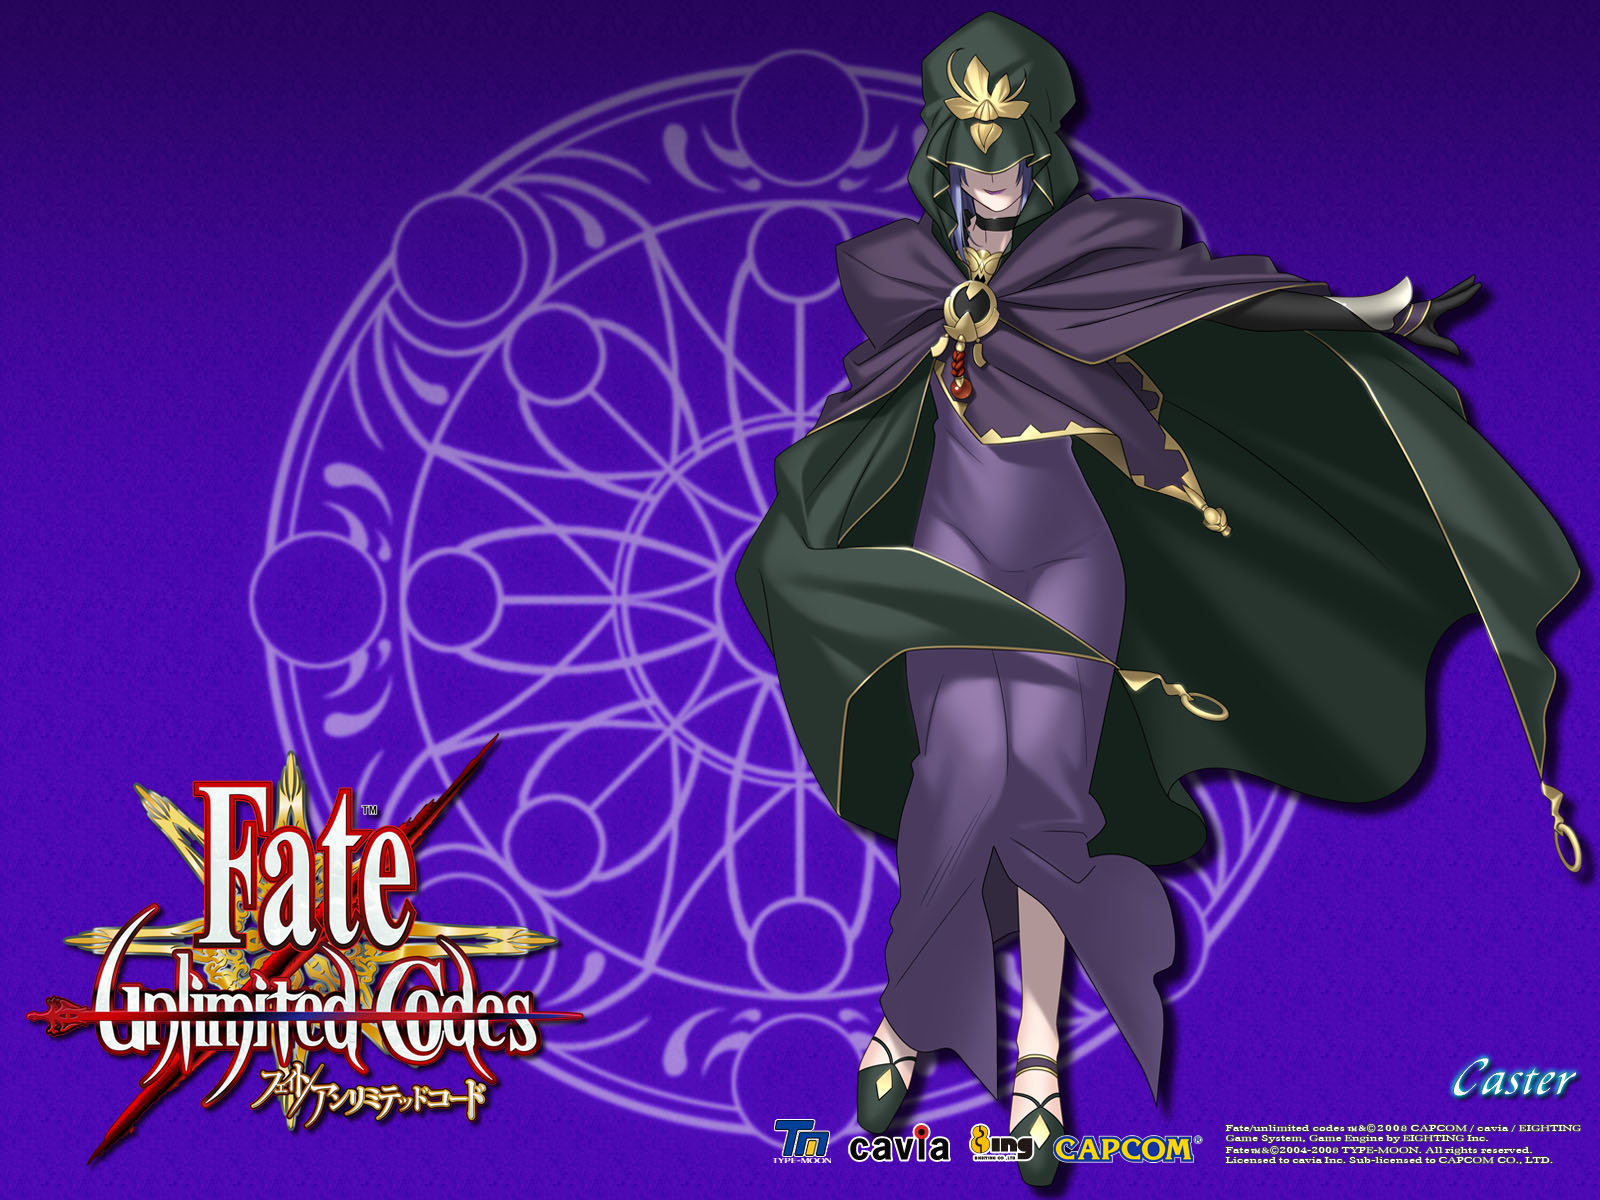 Images of Fate unlimited Codes | 1600x1200